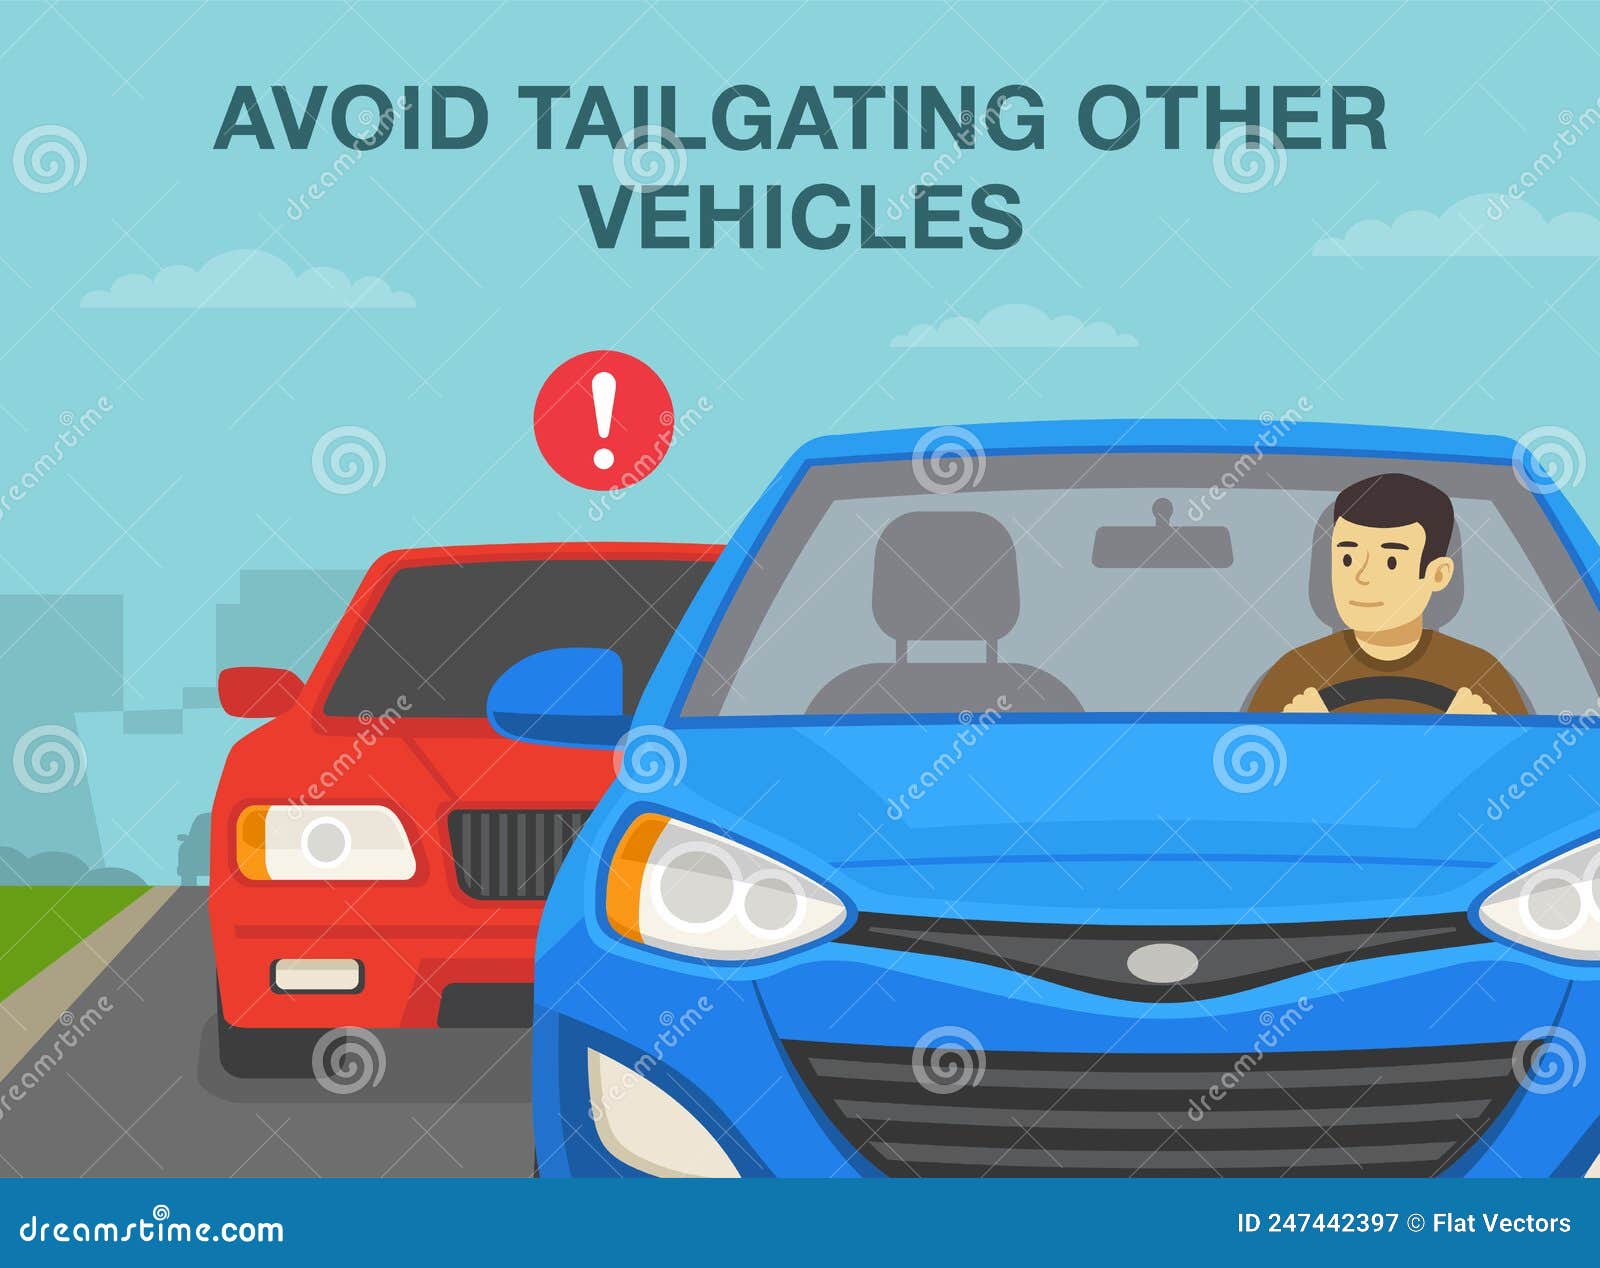 safe driving rules and tips. avoid tailgating other vehicles. young male driver looking at rear mirror while driving a car.